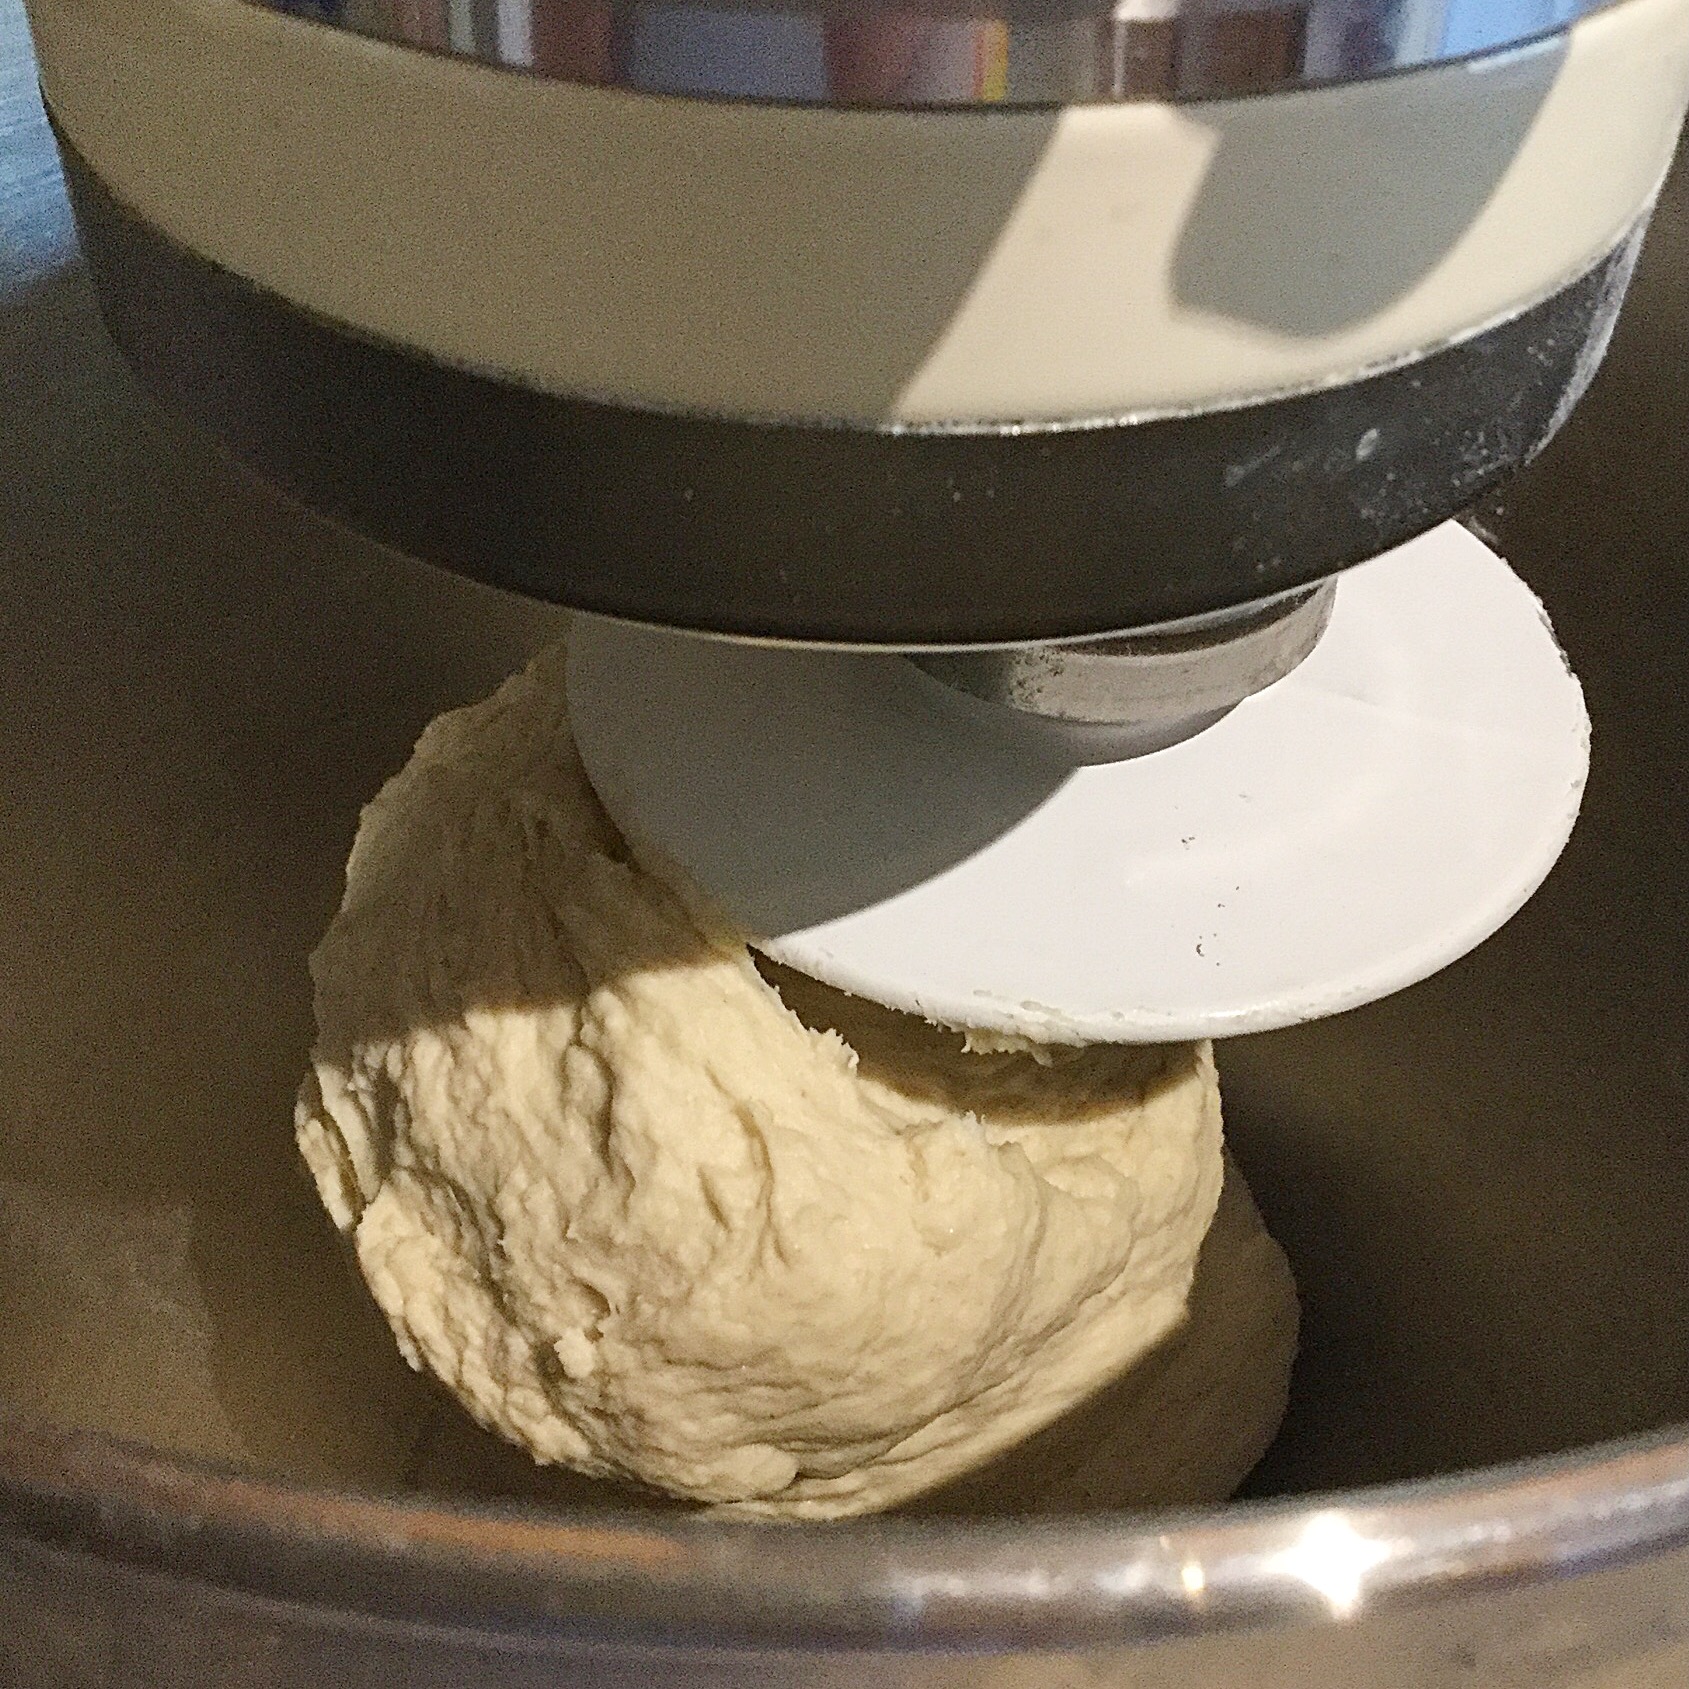 Making Bread with a Dough Hook